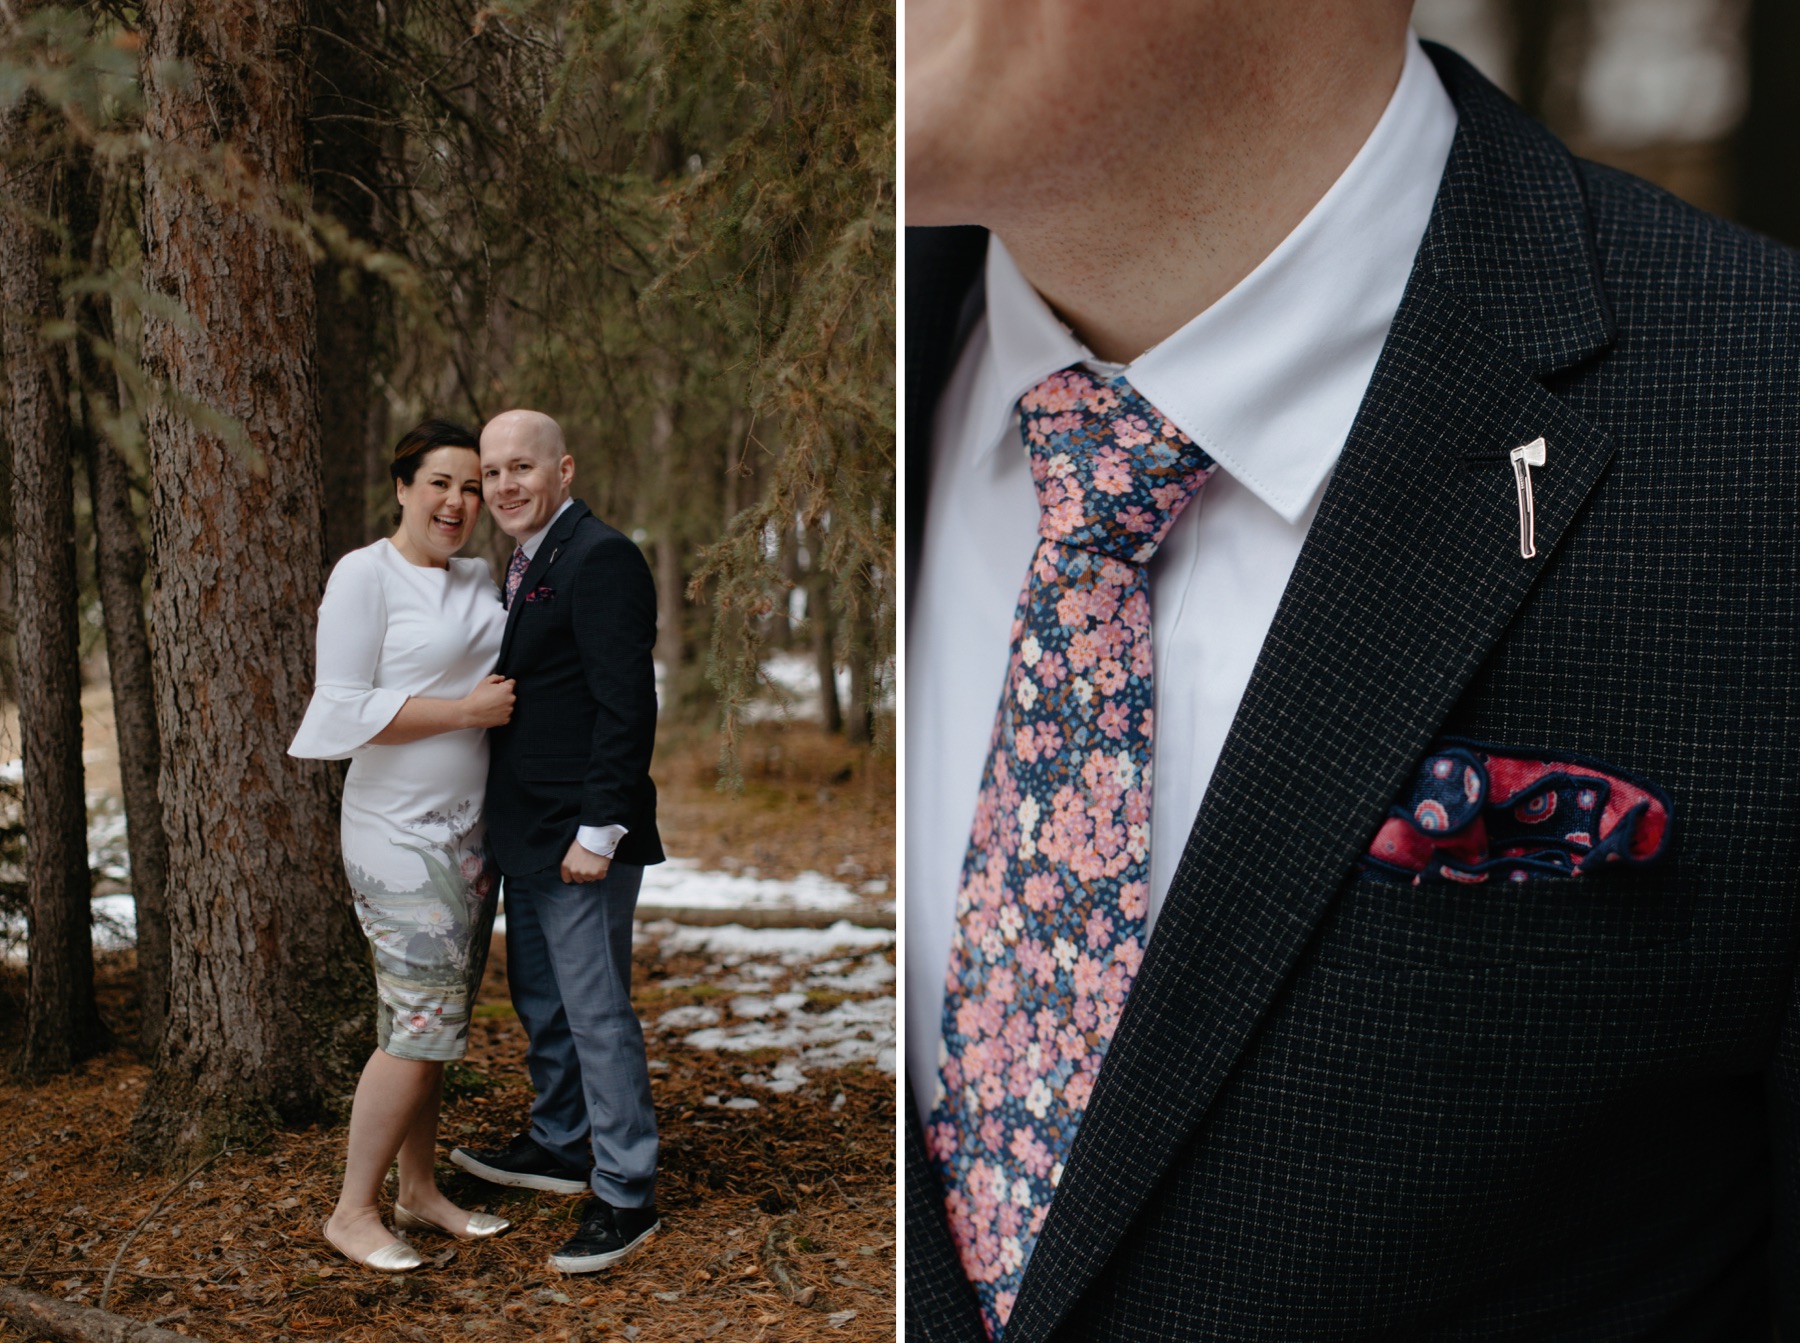 Groom style with pinstriped suit, floral tie and axe pin